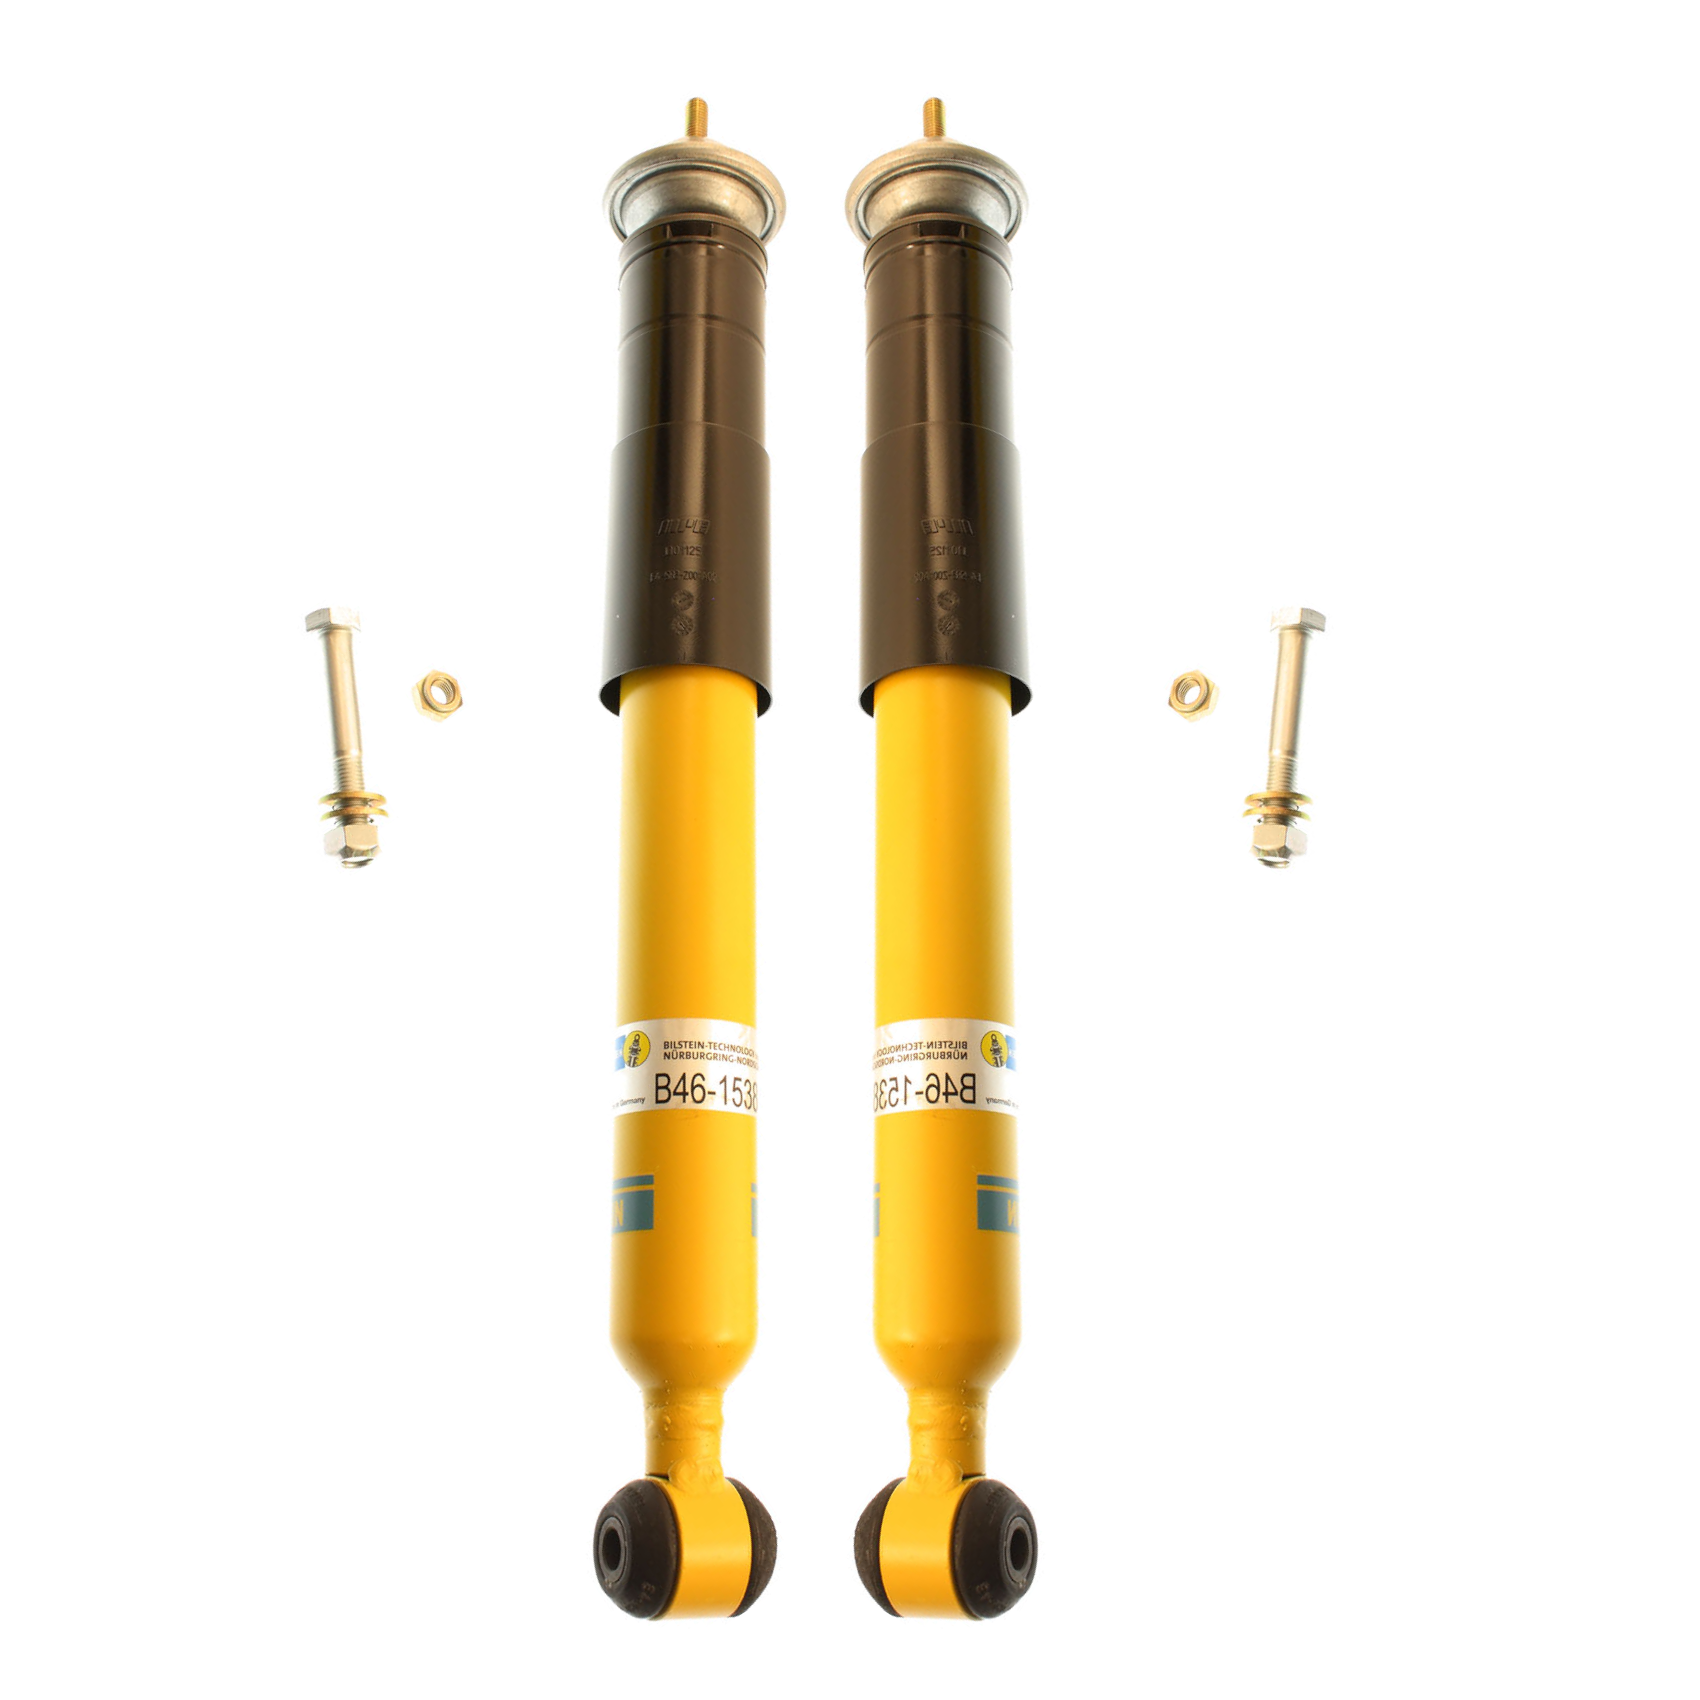 BILSTEIN B4, B6 or B8: Which is the right shock absorber?